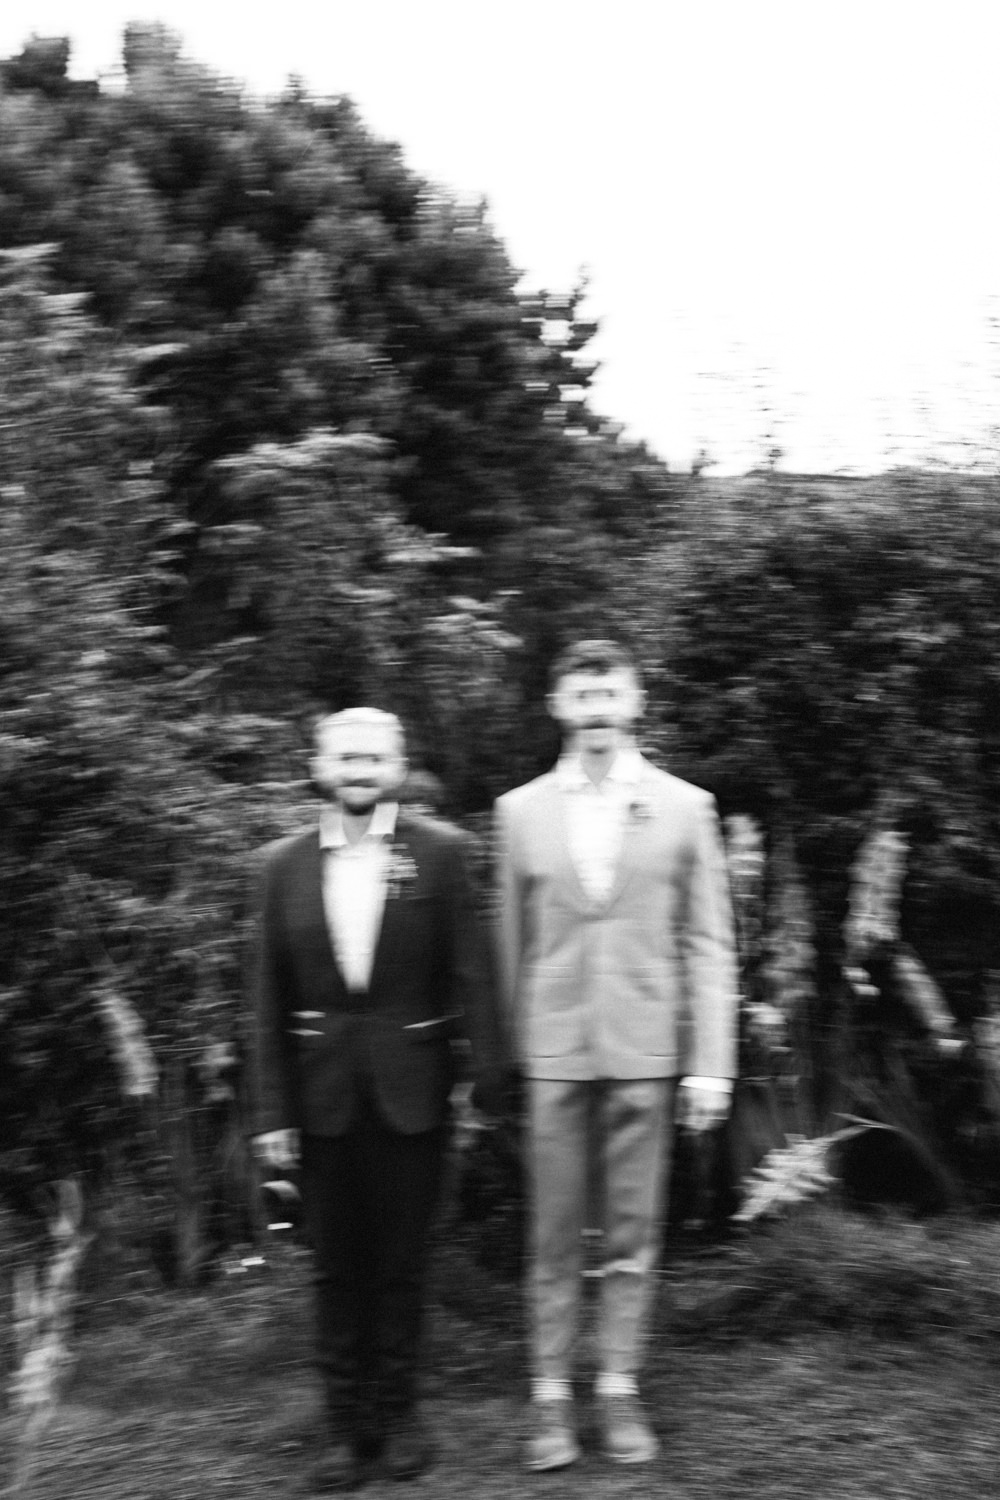 artistic black and white photo of two grooms on their wedding day LGBTQ Wedding Photographer Ireland